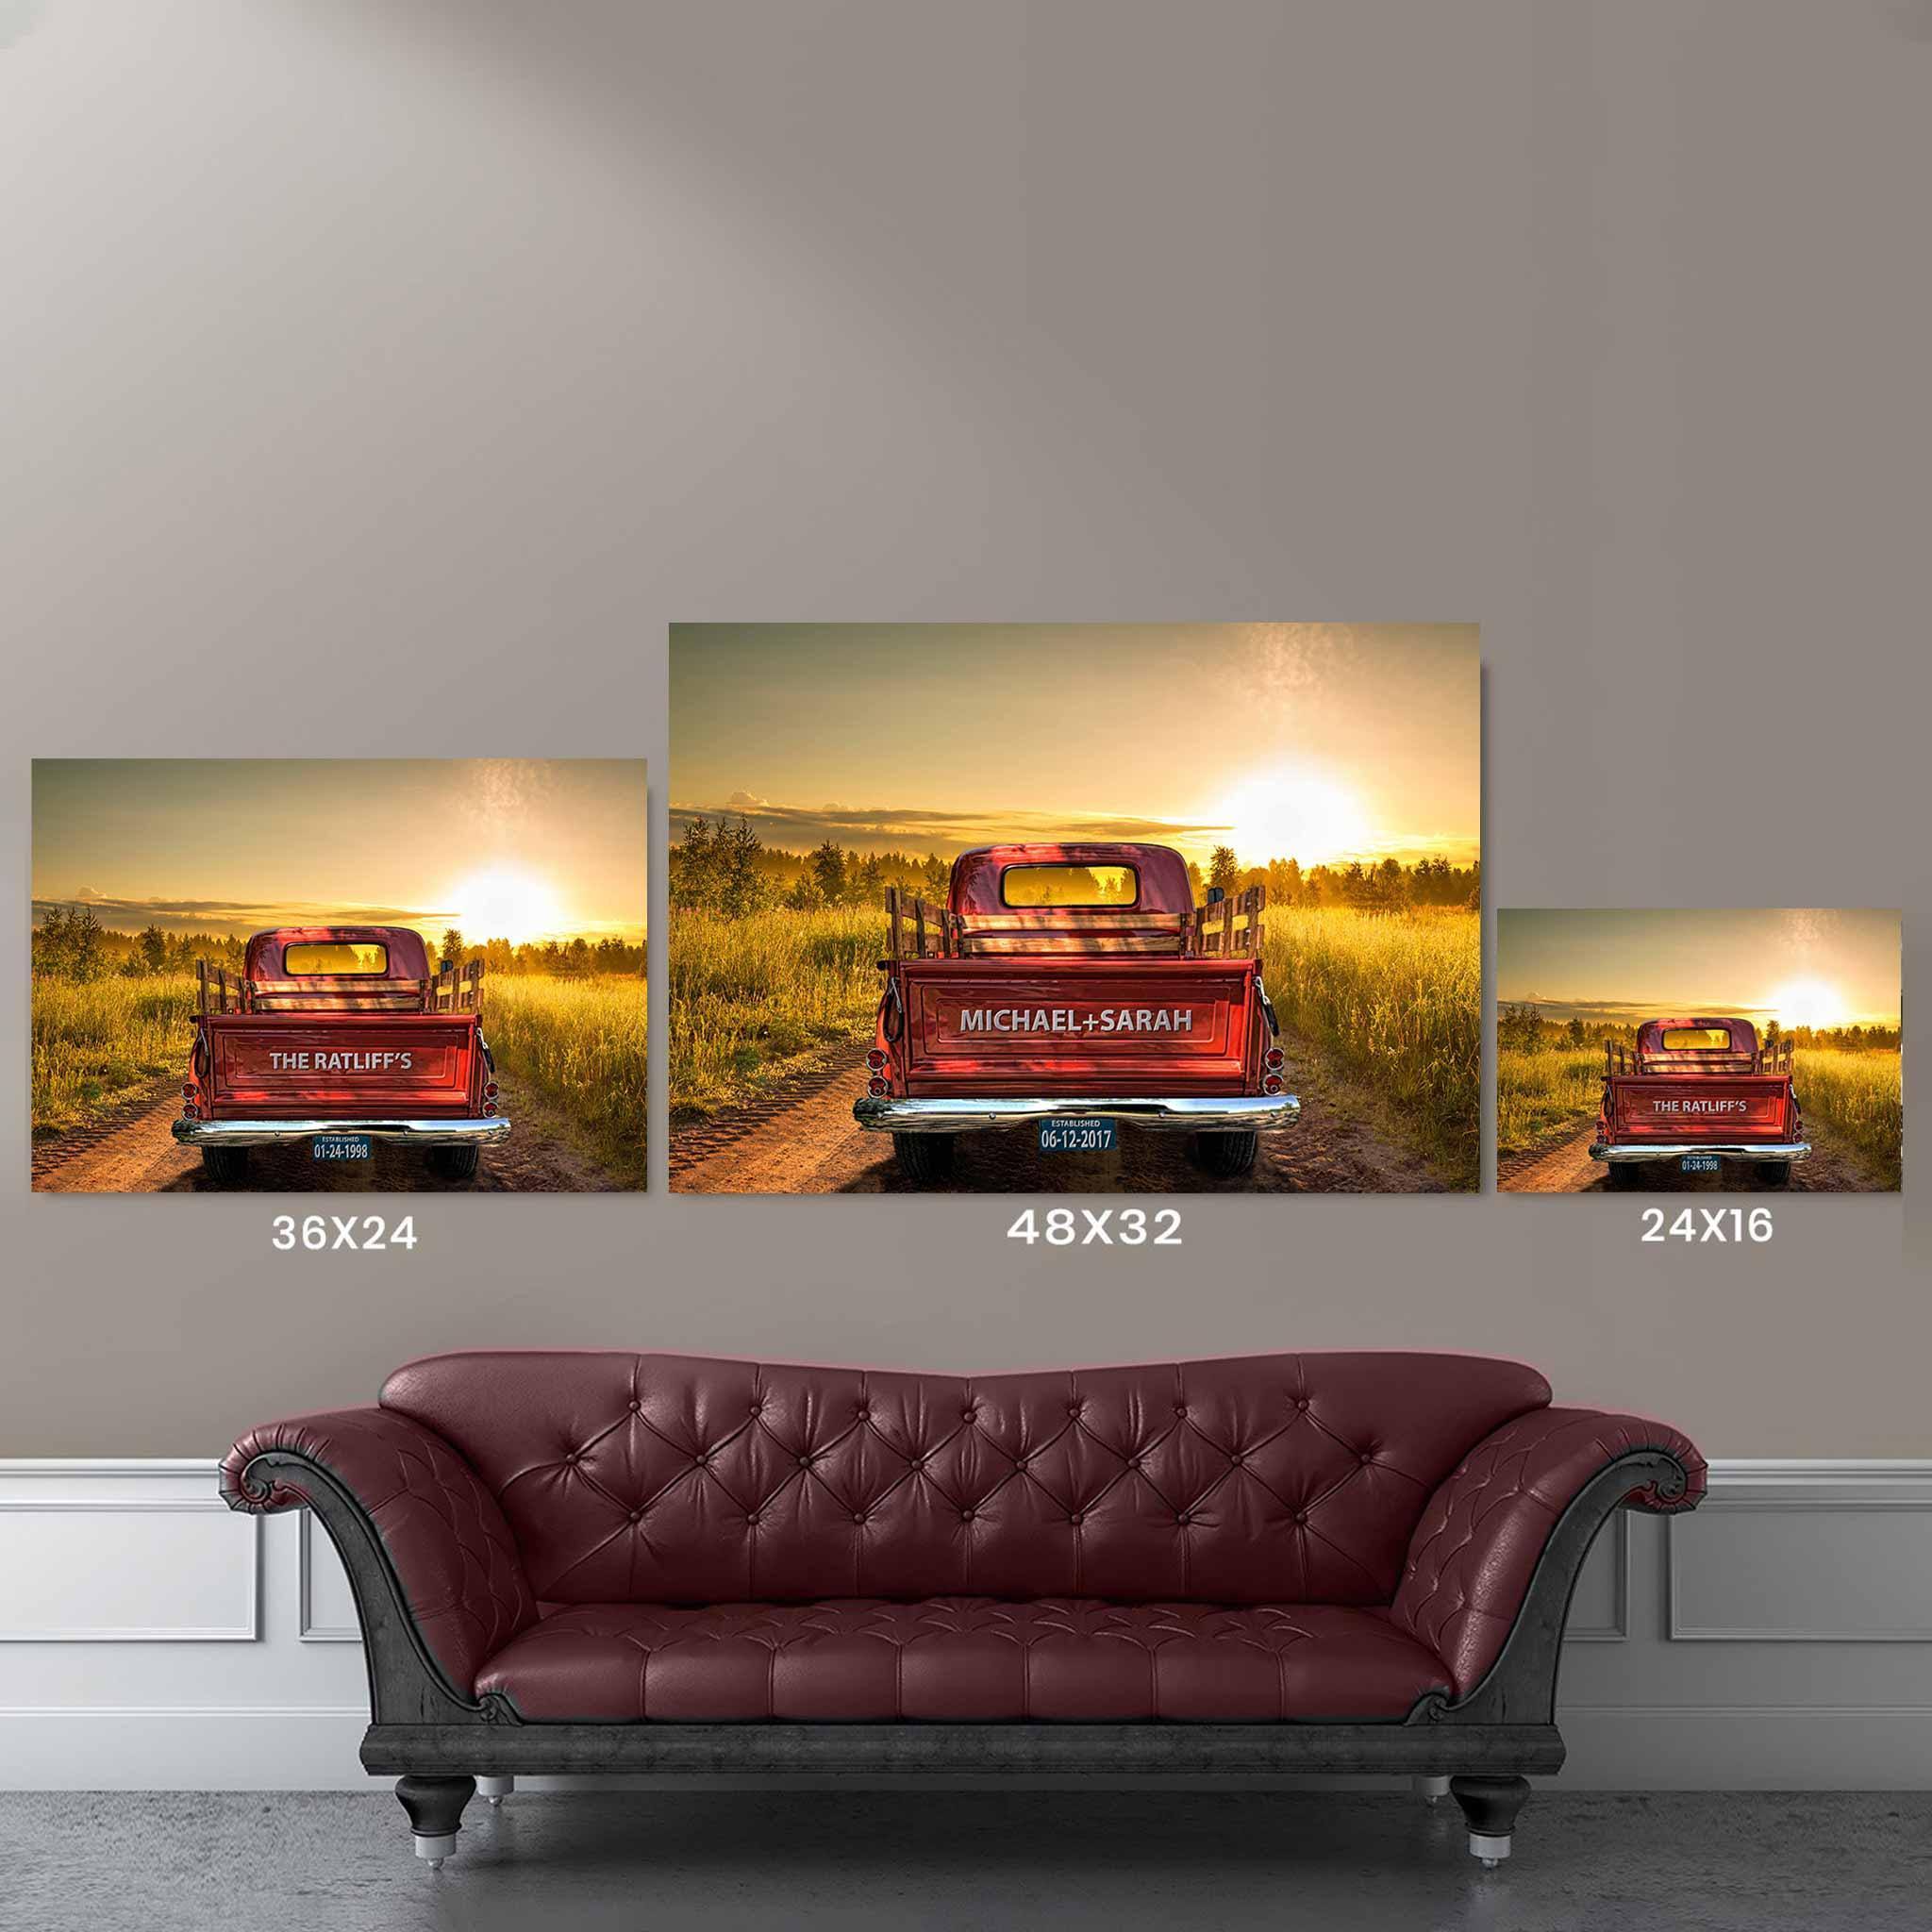 Vintage Truck Dirt Road And Sunset Personalized Tailgate & License Plate PosterCustomly Gifts